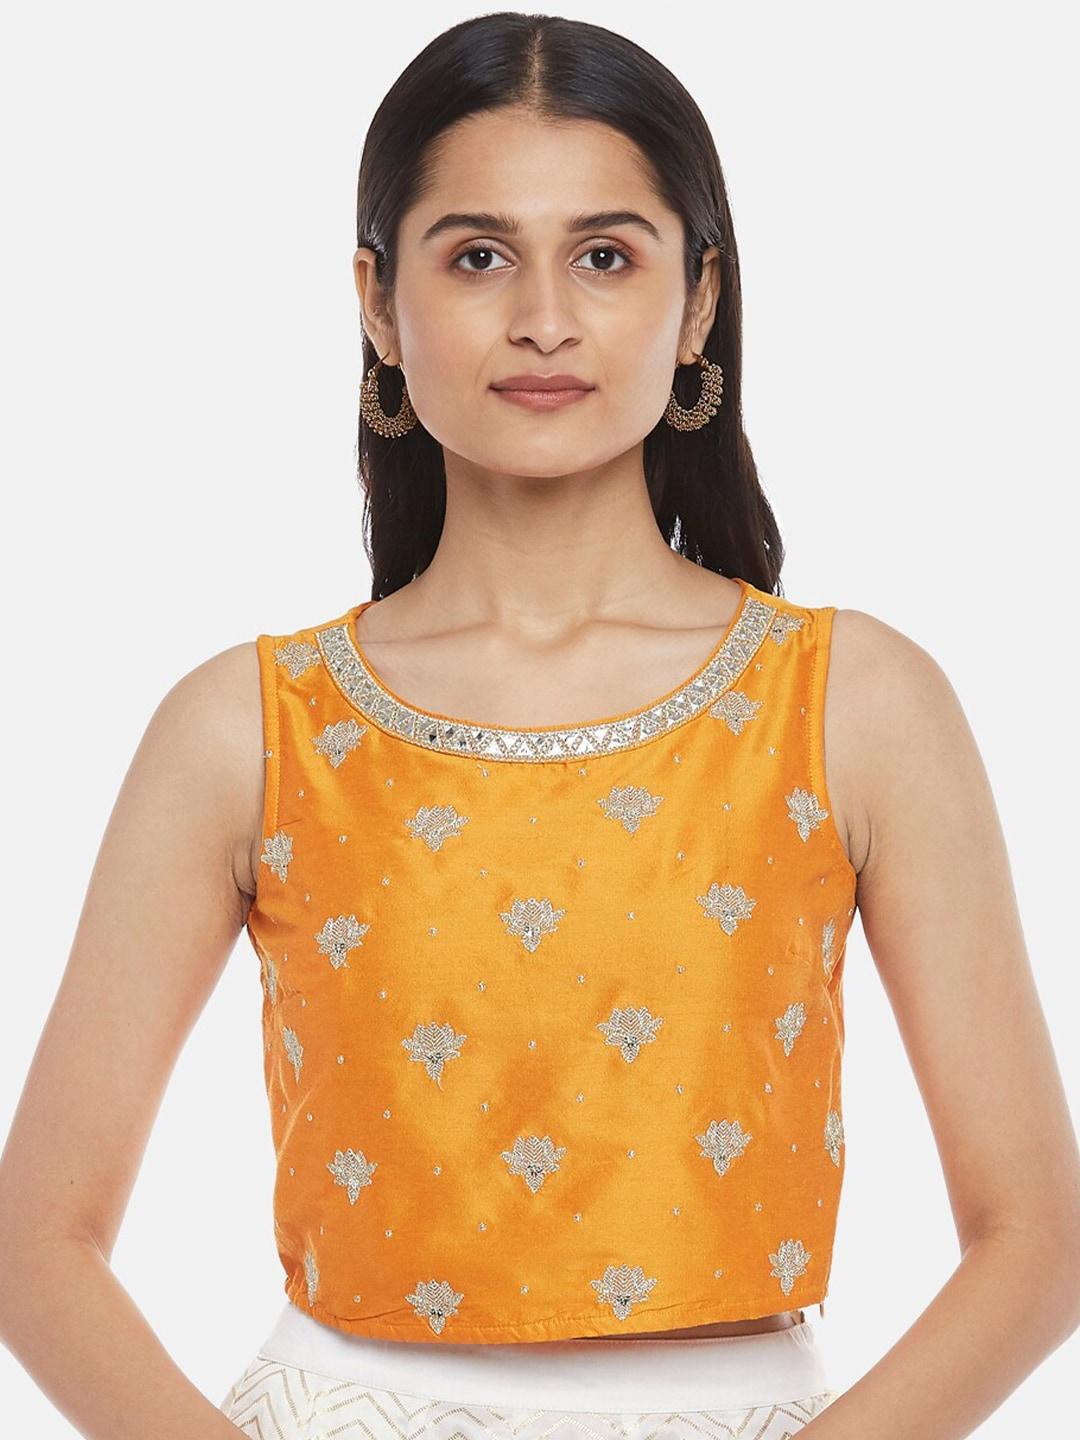 akkriti-by-pantaloons-women-gold-toned-embroidered-crop-top